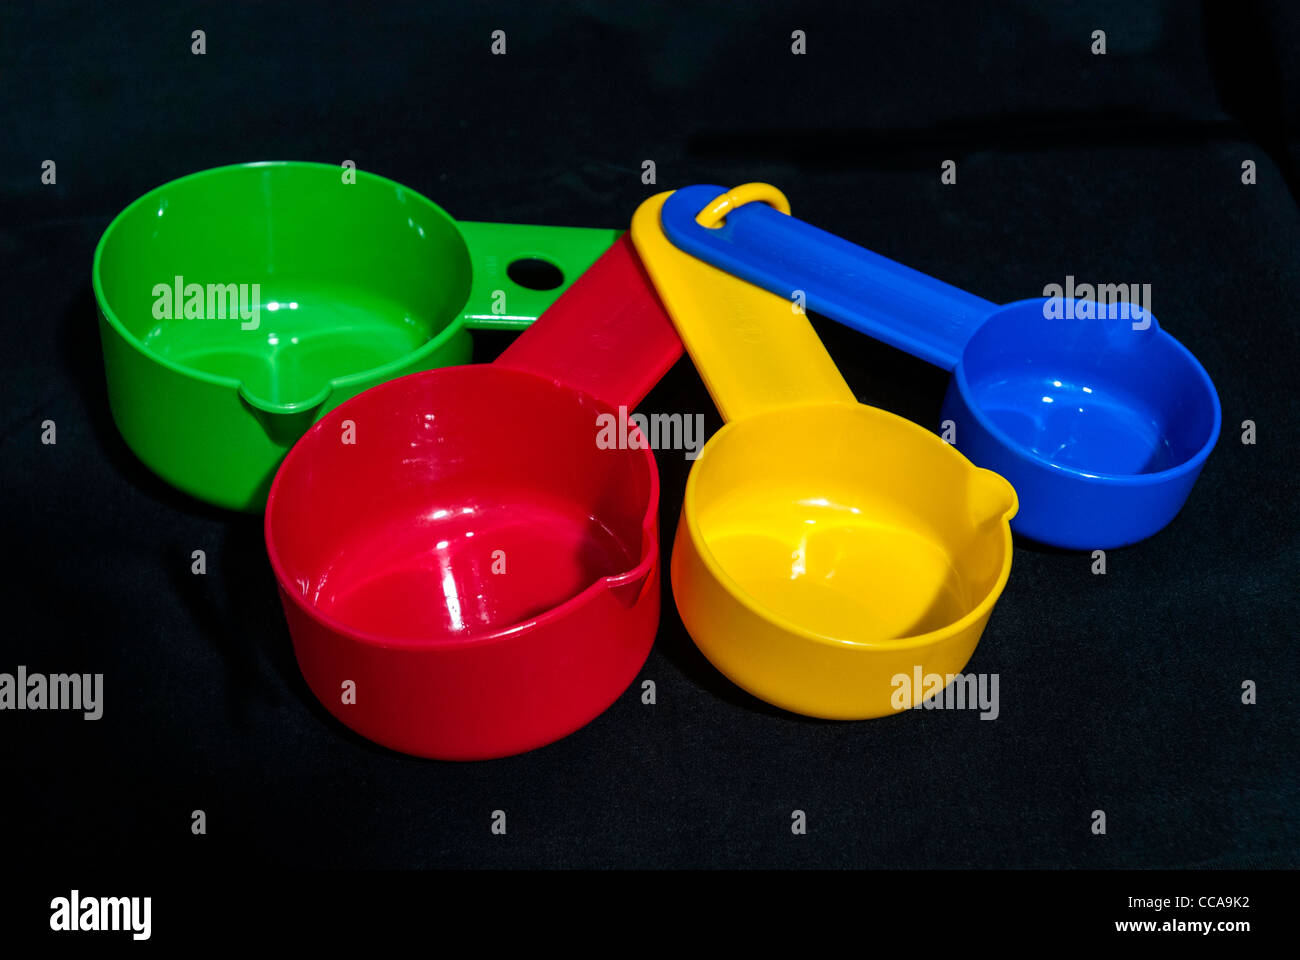 Food Measuring Cups, Portion Control Stock Image - Image of